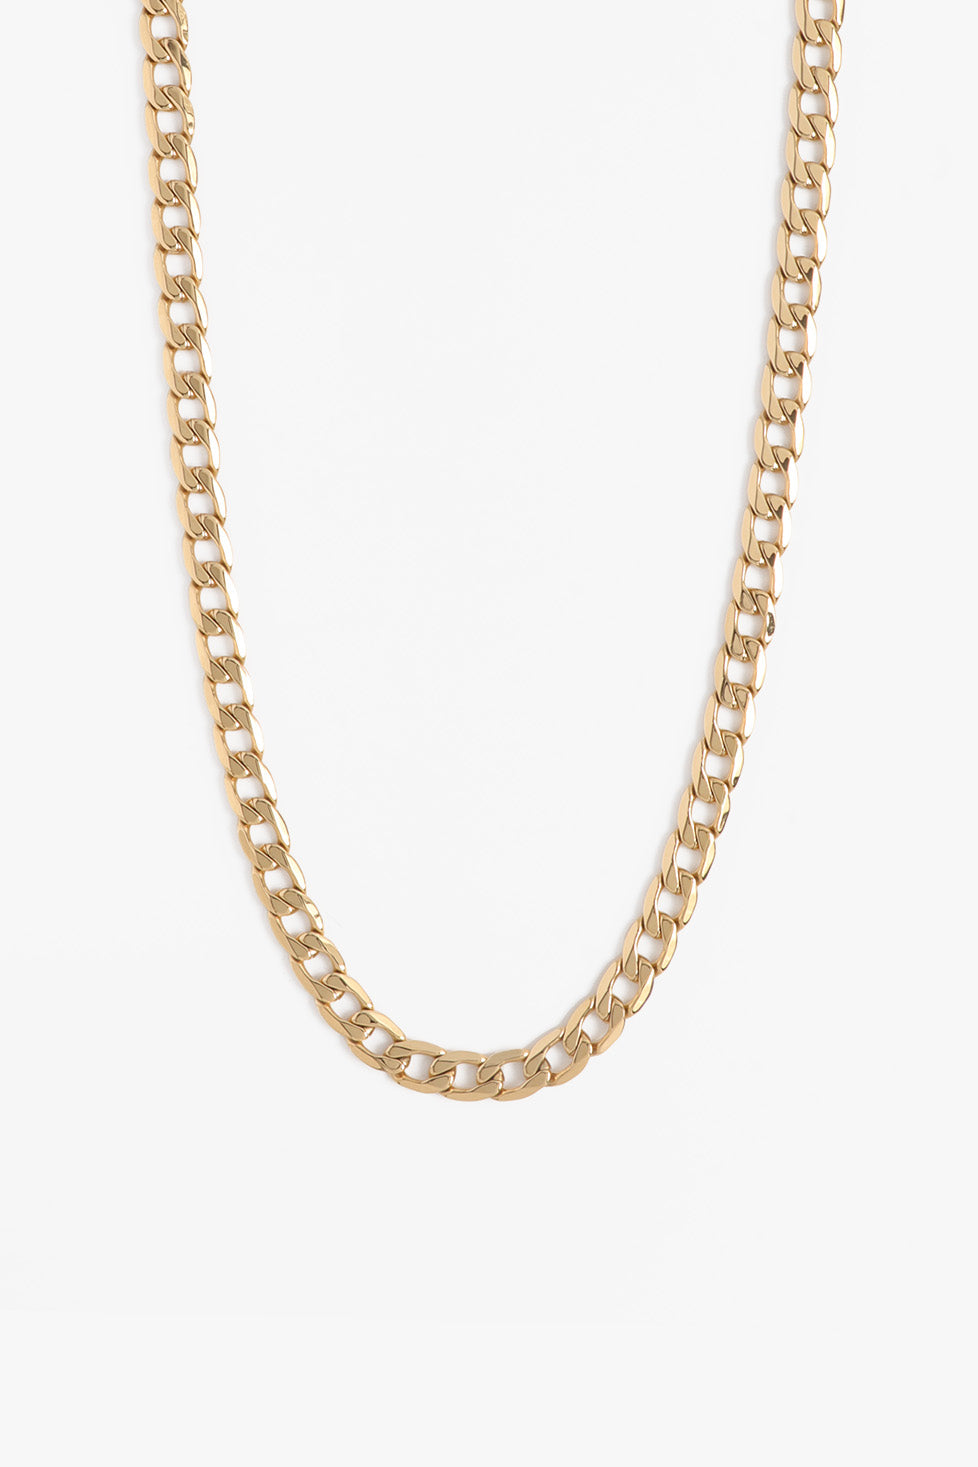 Marrin Costello Jewelry Kings Chain 18 inch flat cuban link chain. Waterproof, sustainable, hypoallergenic. 14k gold plated stainless steel.